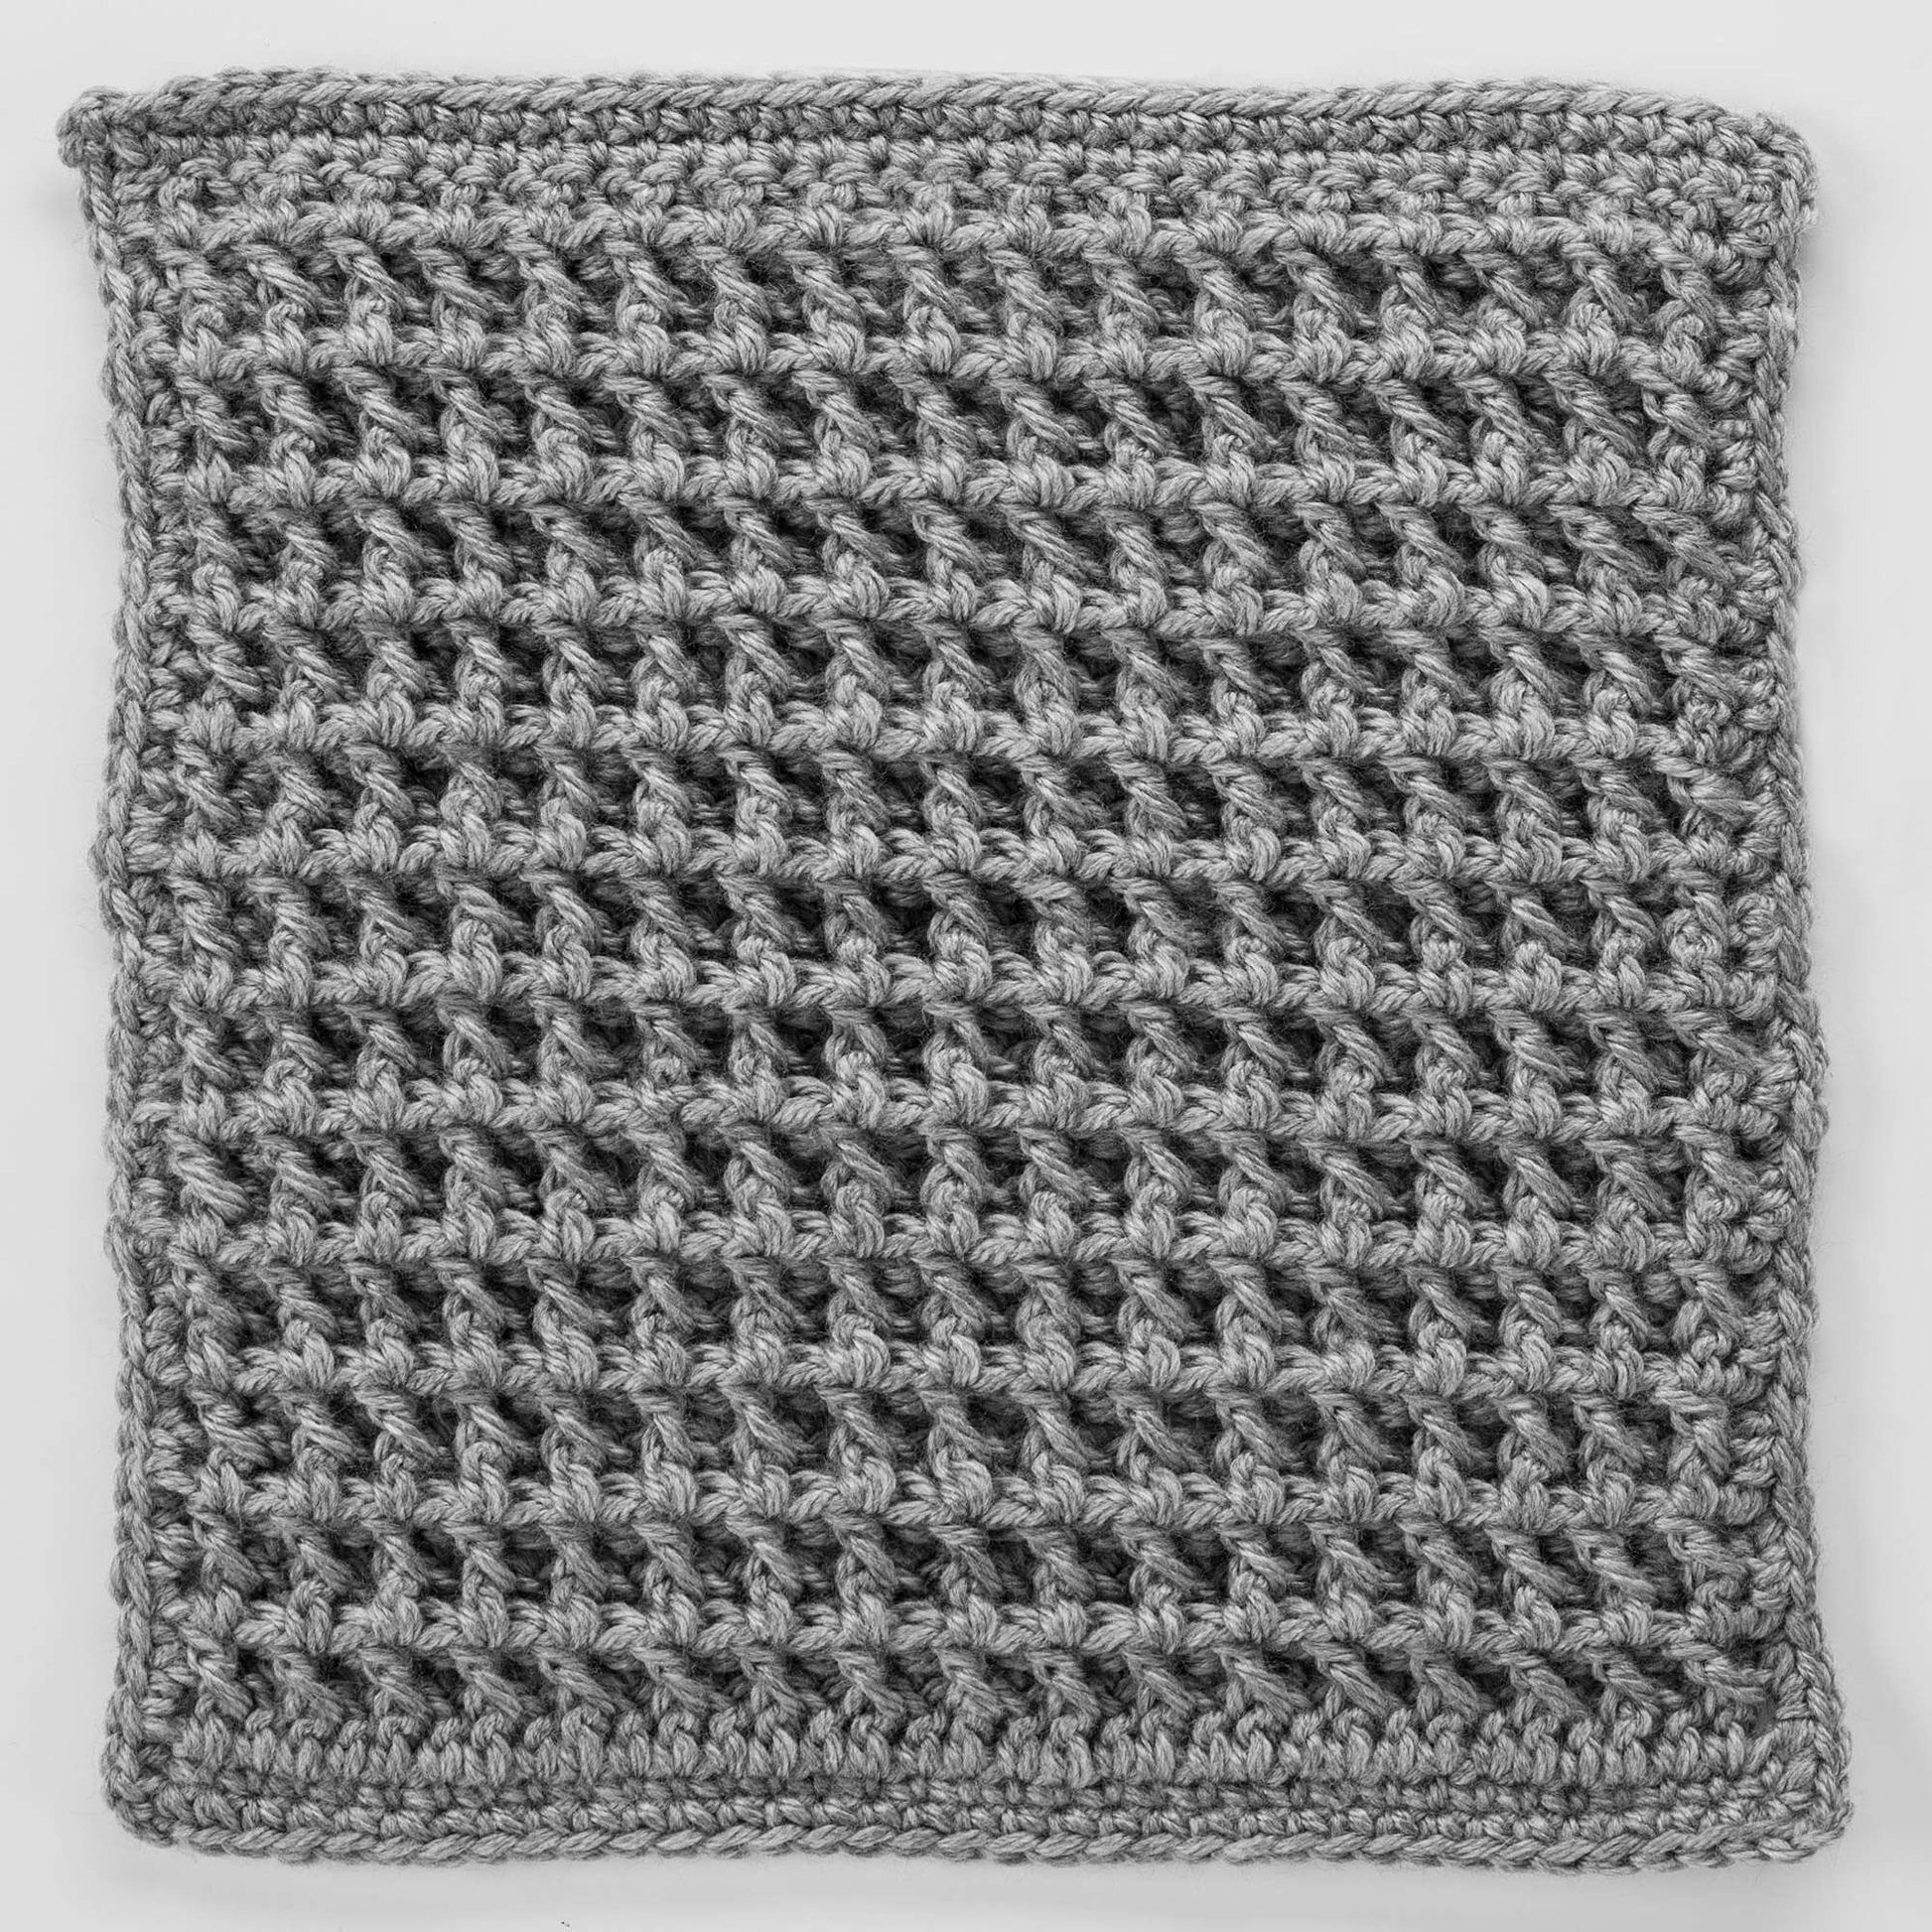 Free Red Heart Front Post Double Crochet Square For Checkerboard Textures Throw Pattern